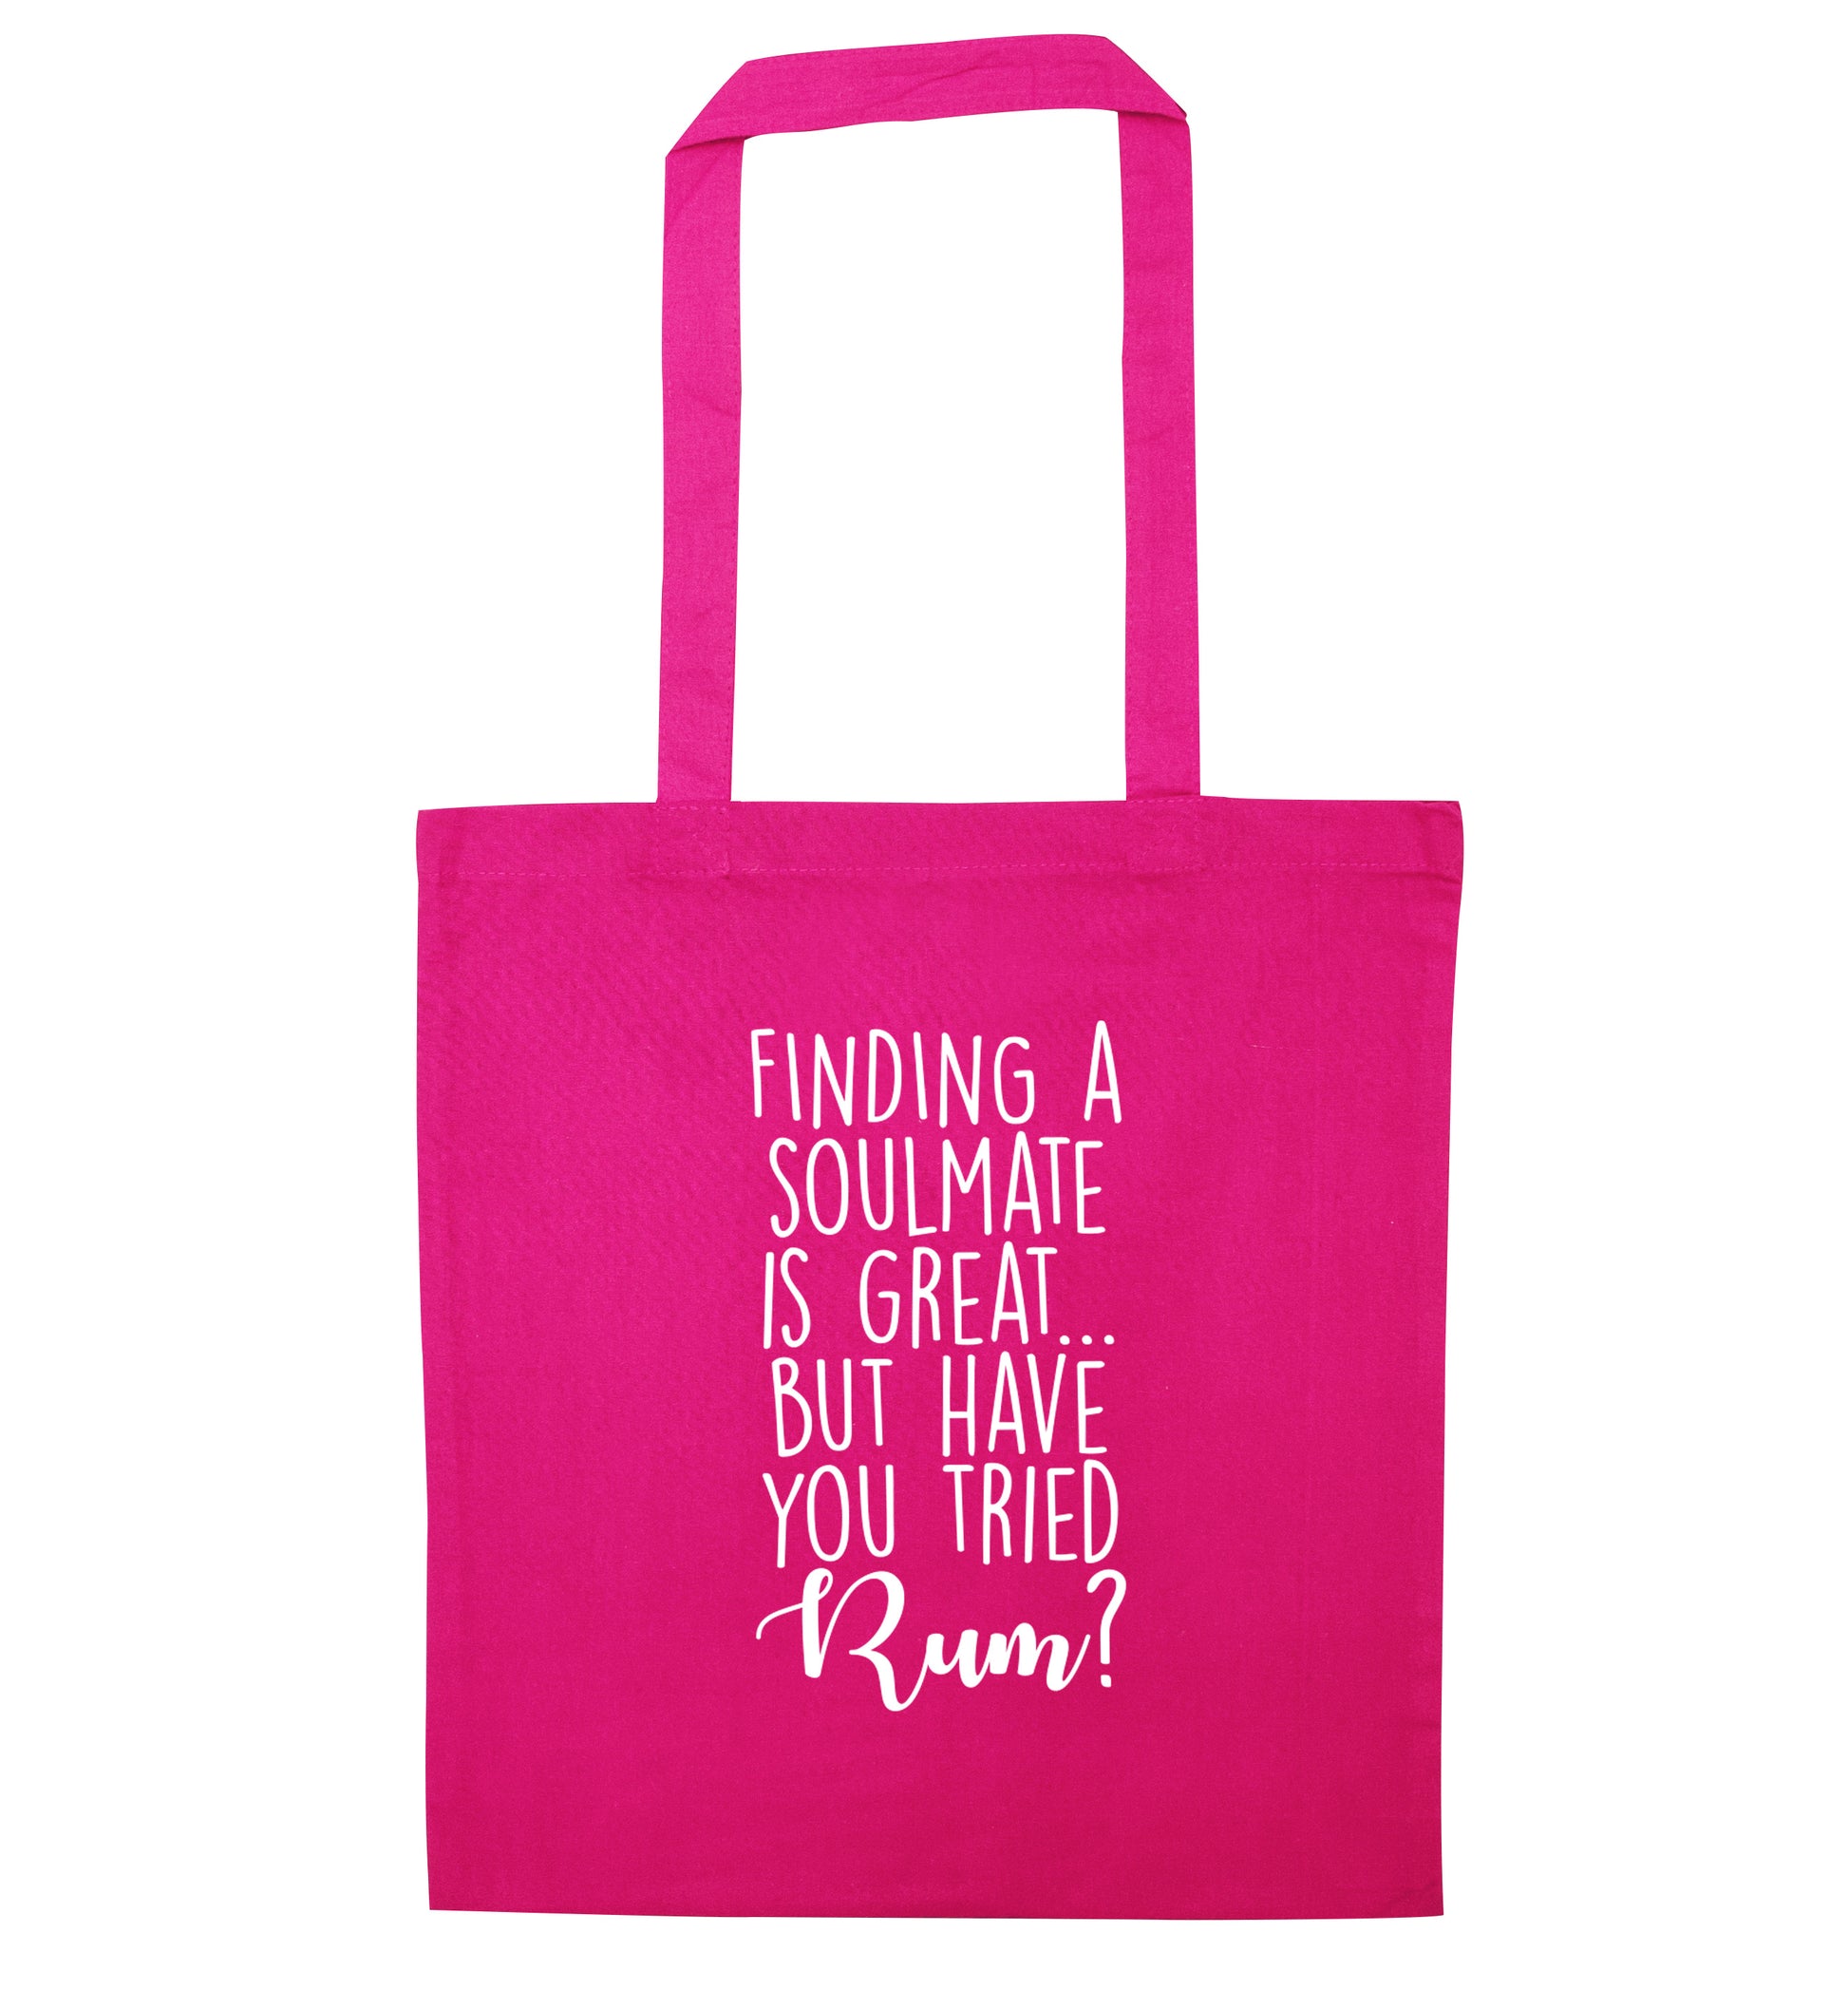 Finding a soulmate is great but have you tried rum? pink tote bag